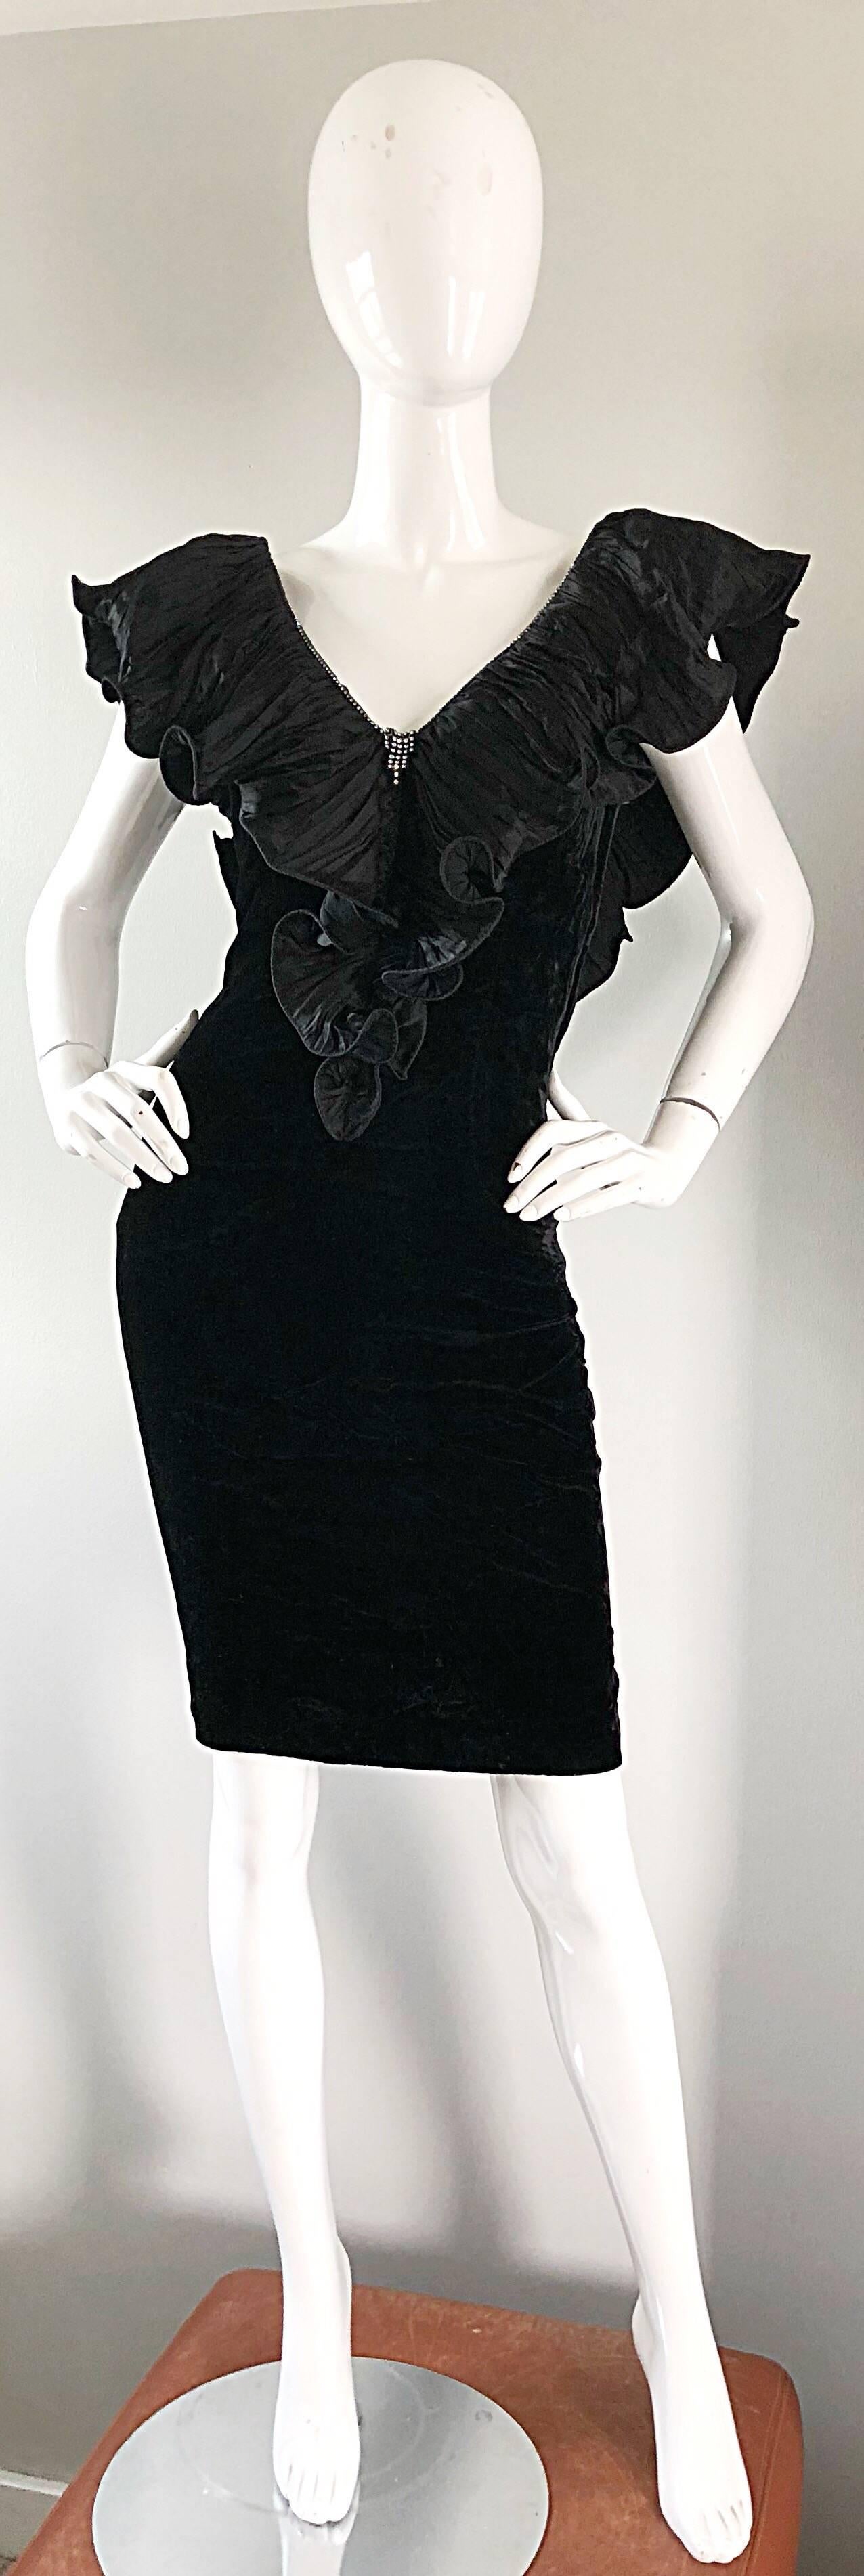 Extraordinary mid 1980s vintage black crushed velvet bodcon dress! Features a soft crushed velvet, with a taffeta pleated ruffle collar and back. Rhinestone detail along the front and back collar. Hidden metal zipper up the side with hook-and-eye